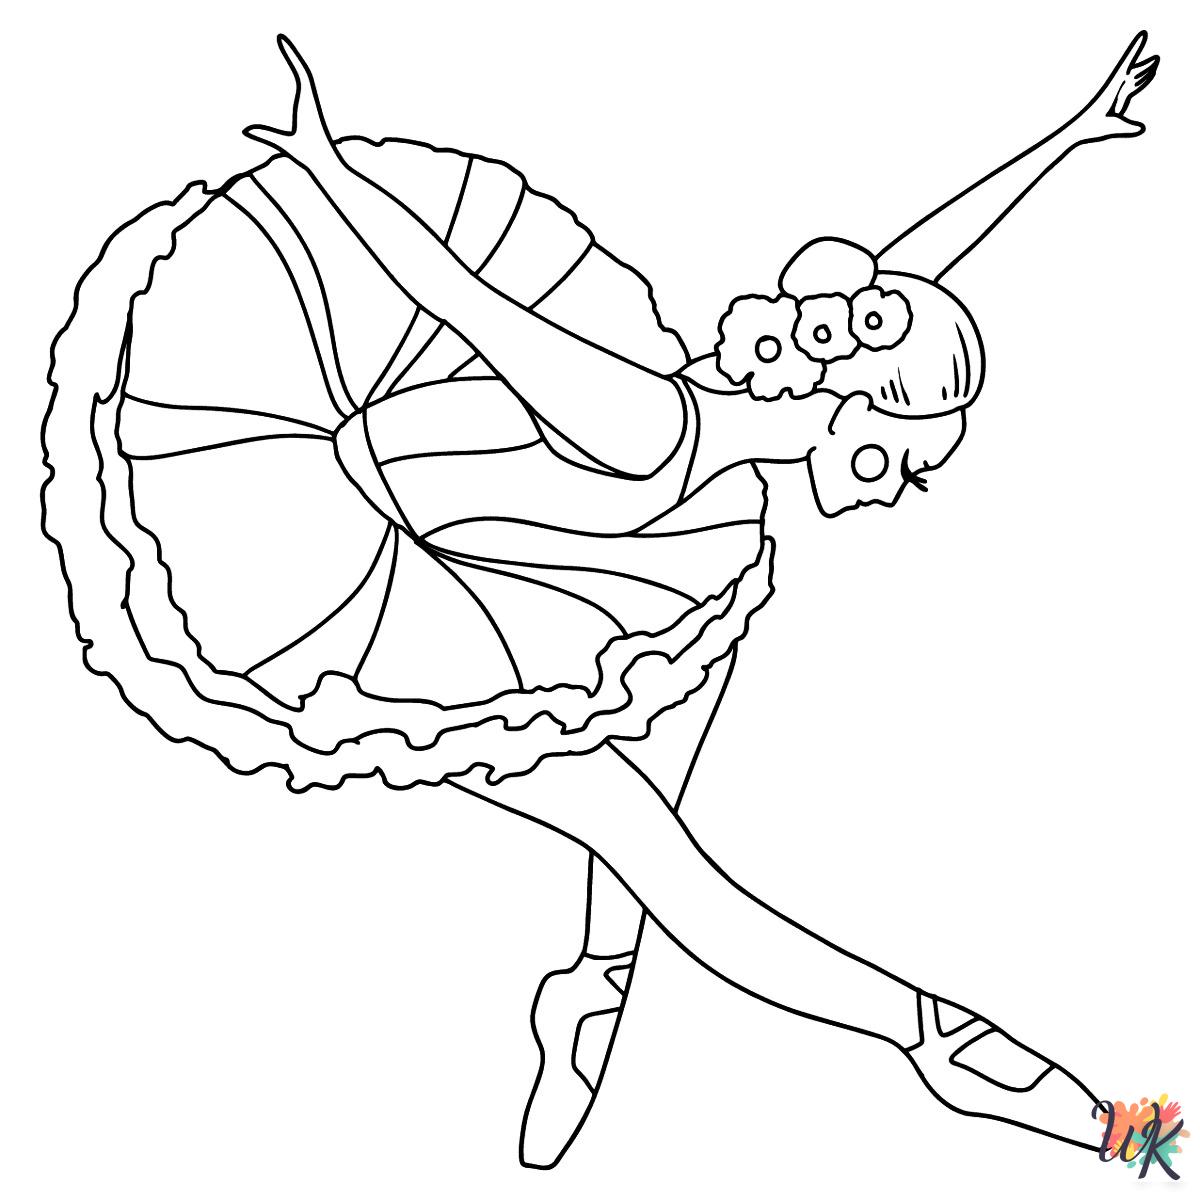 merry Ballerina coloring pages